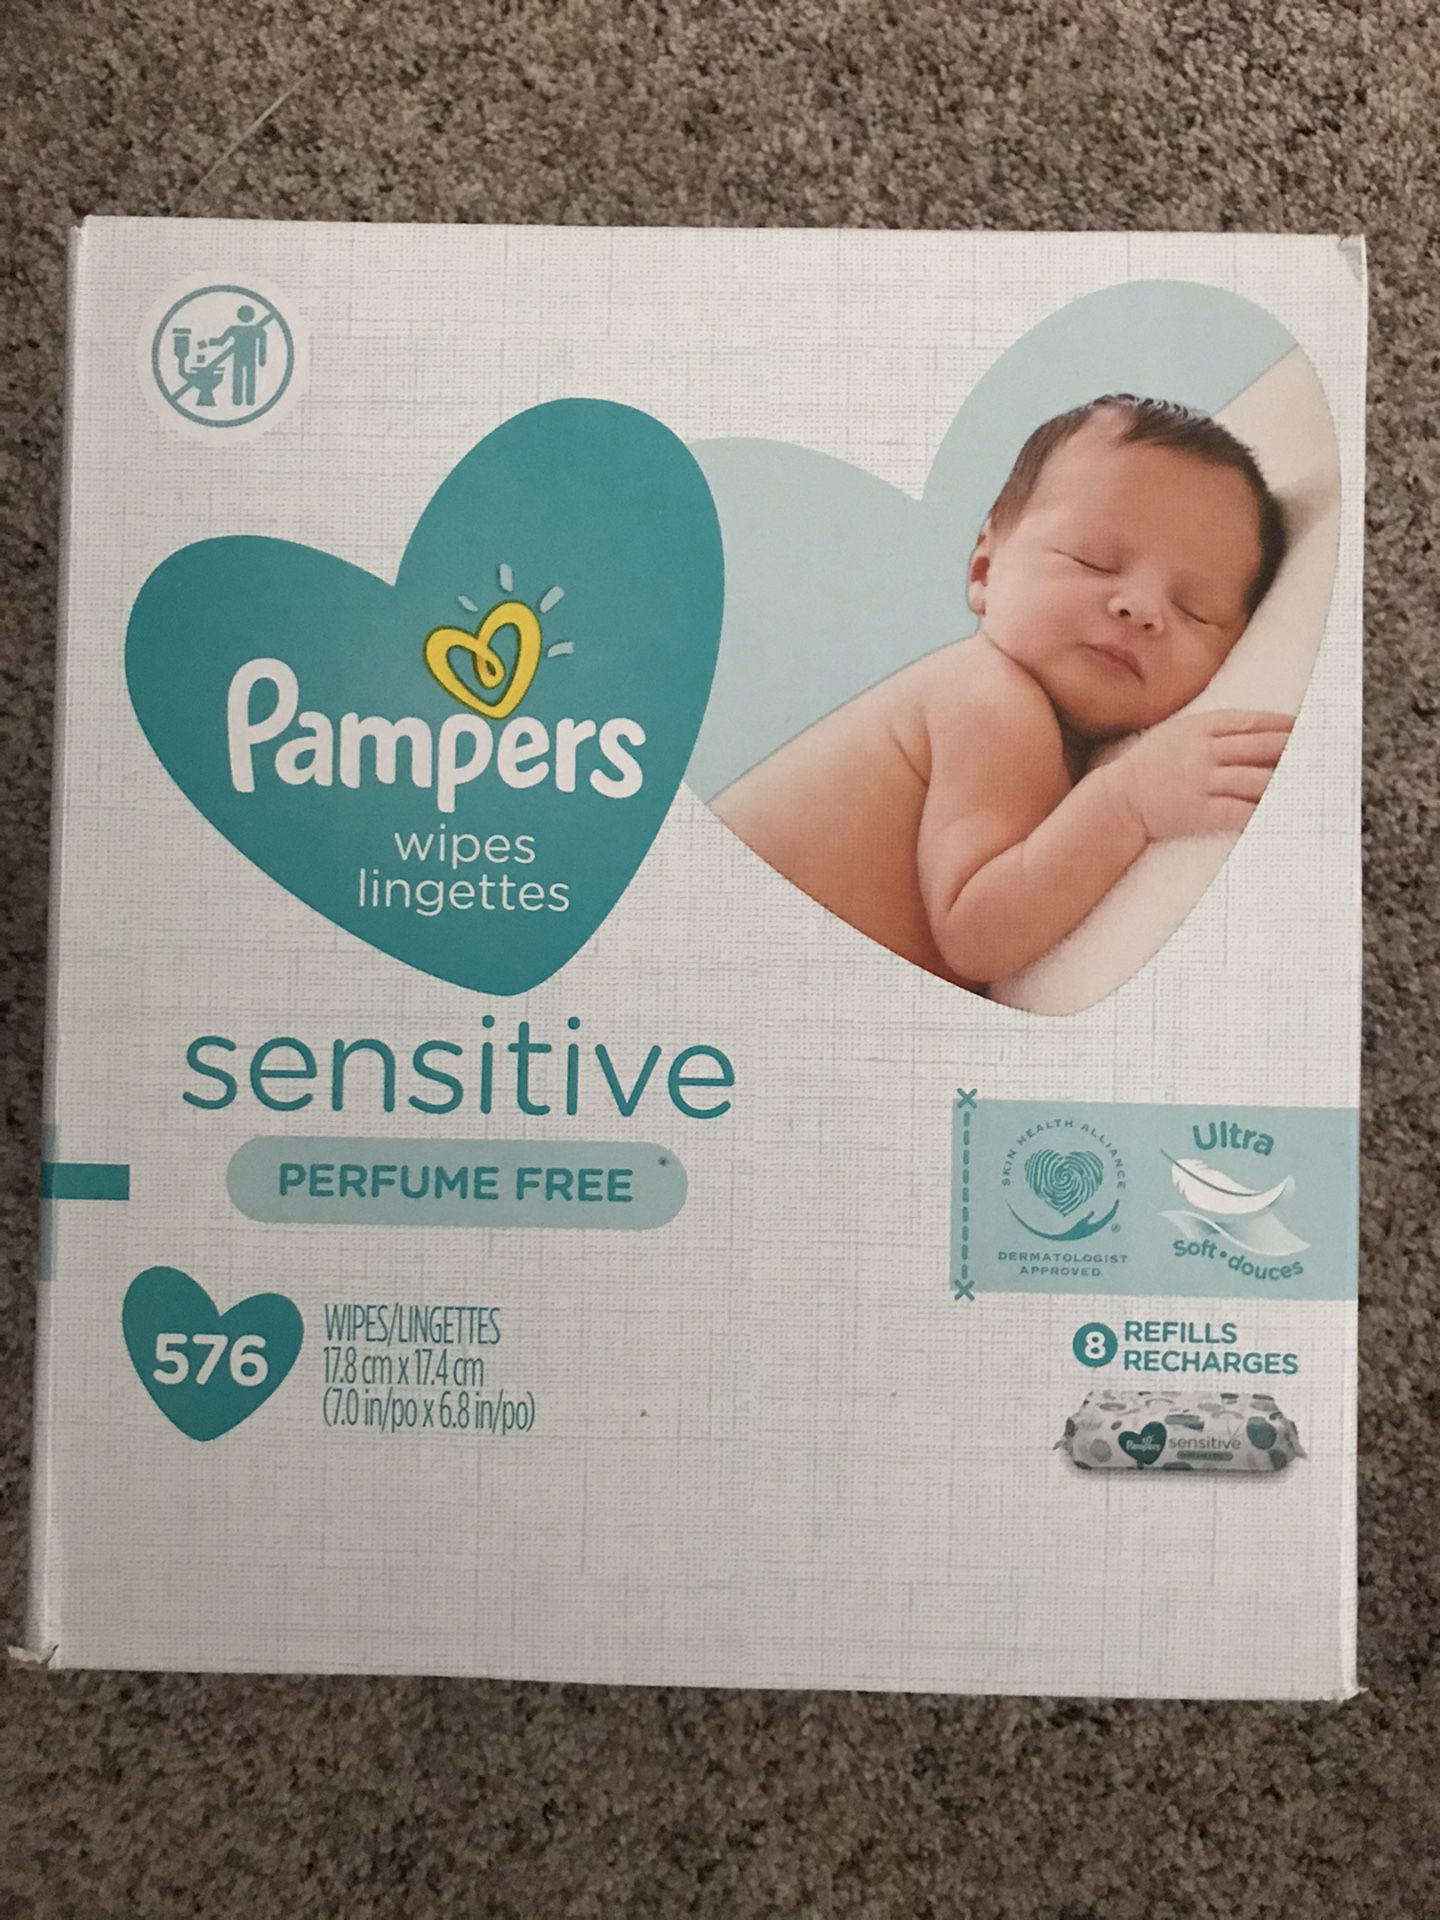 Pampers Sensitive baby wipes 576ct